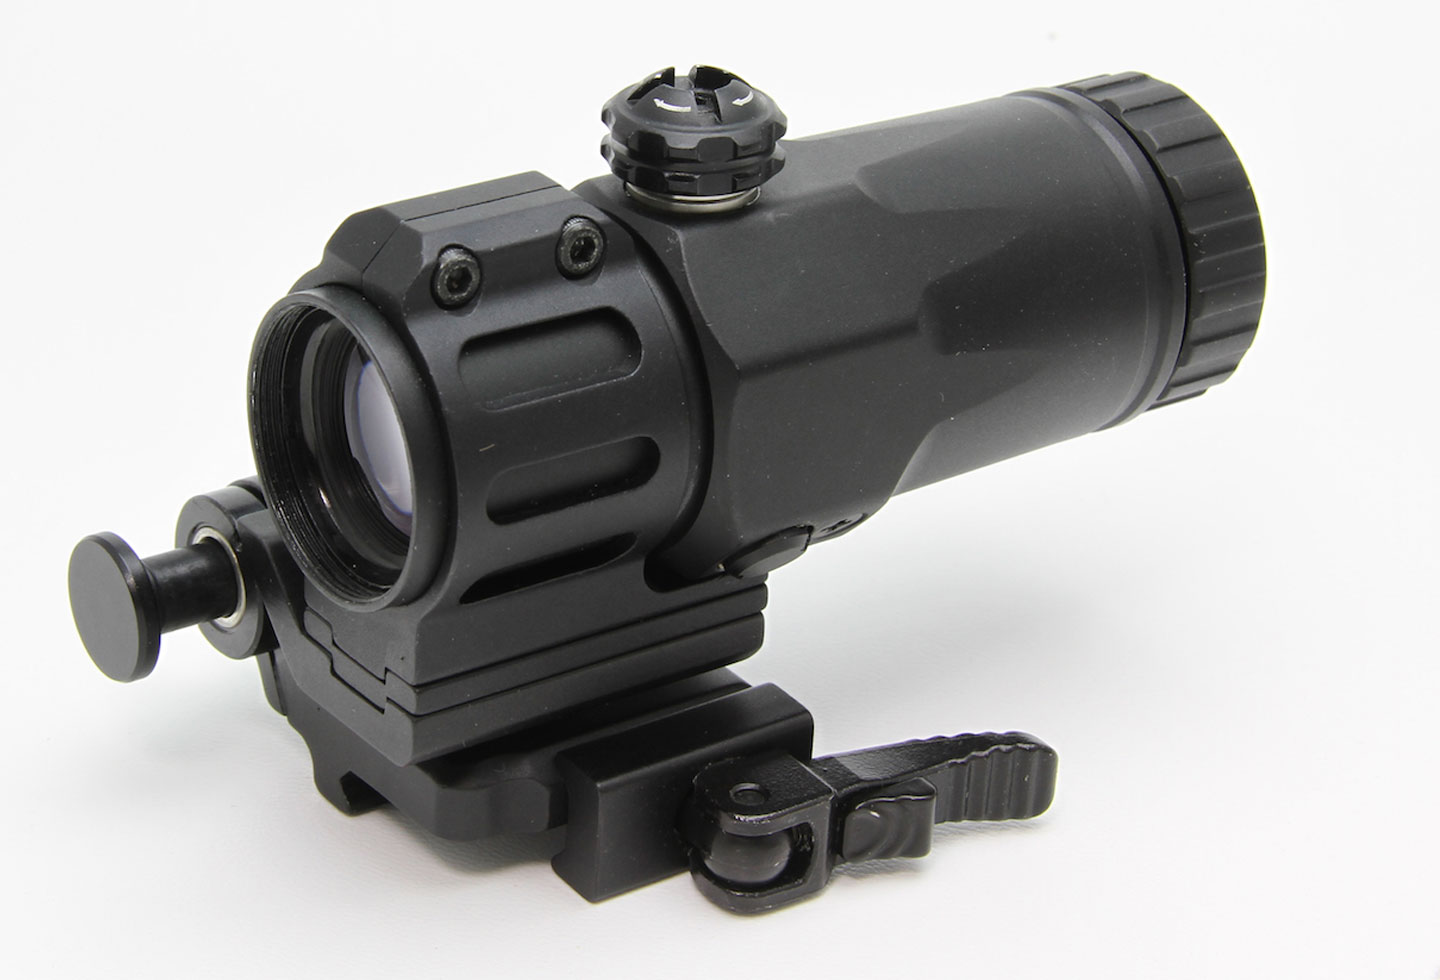 AIRSOFT97 沖縄本店 通販部 / NOVEL ARMS 3X TACTICAL Magnifier